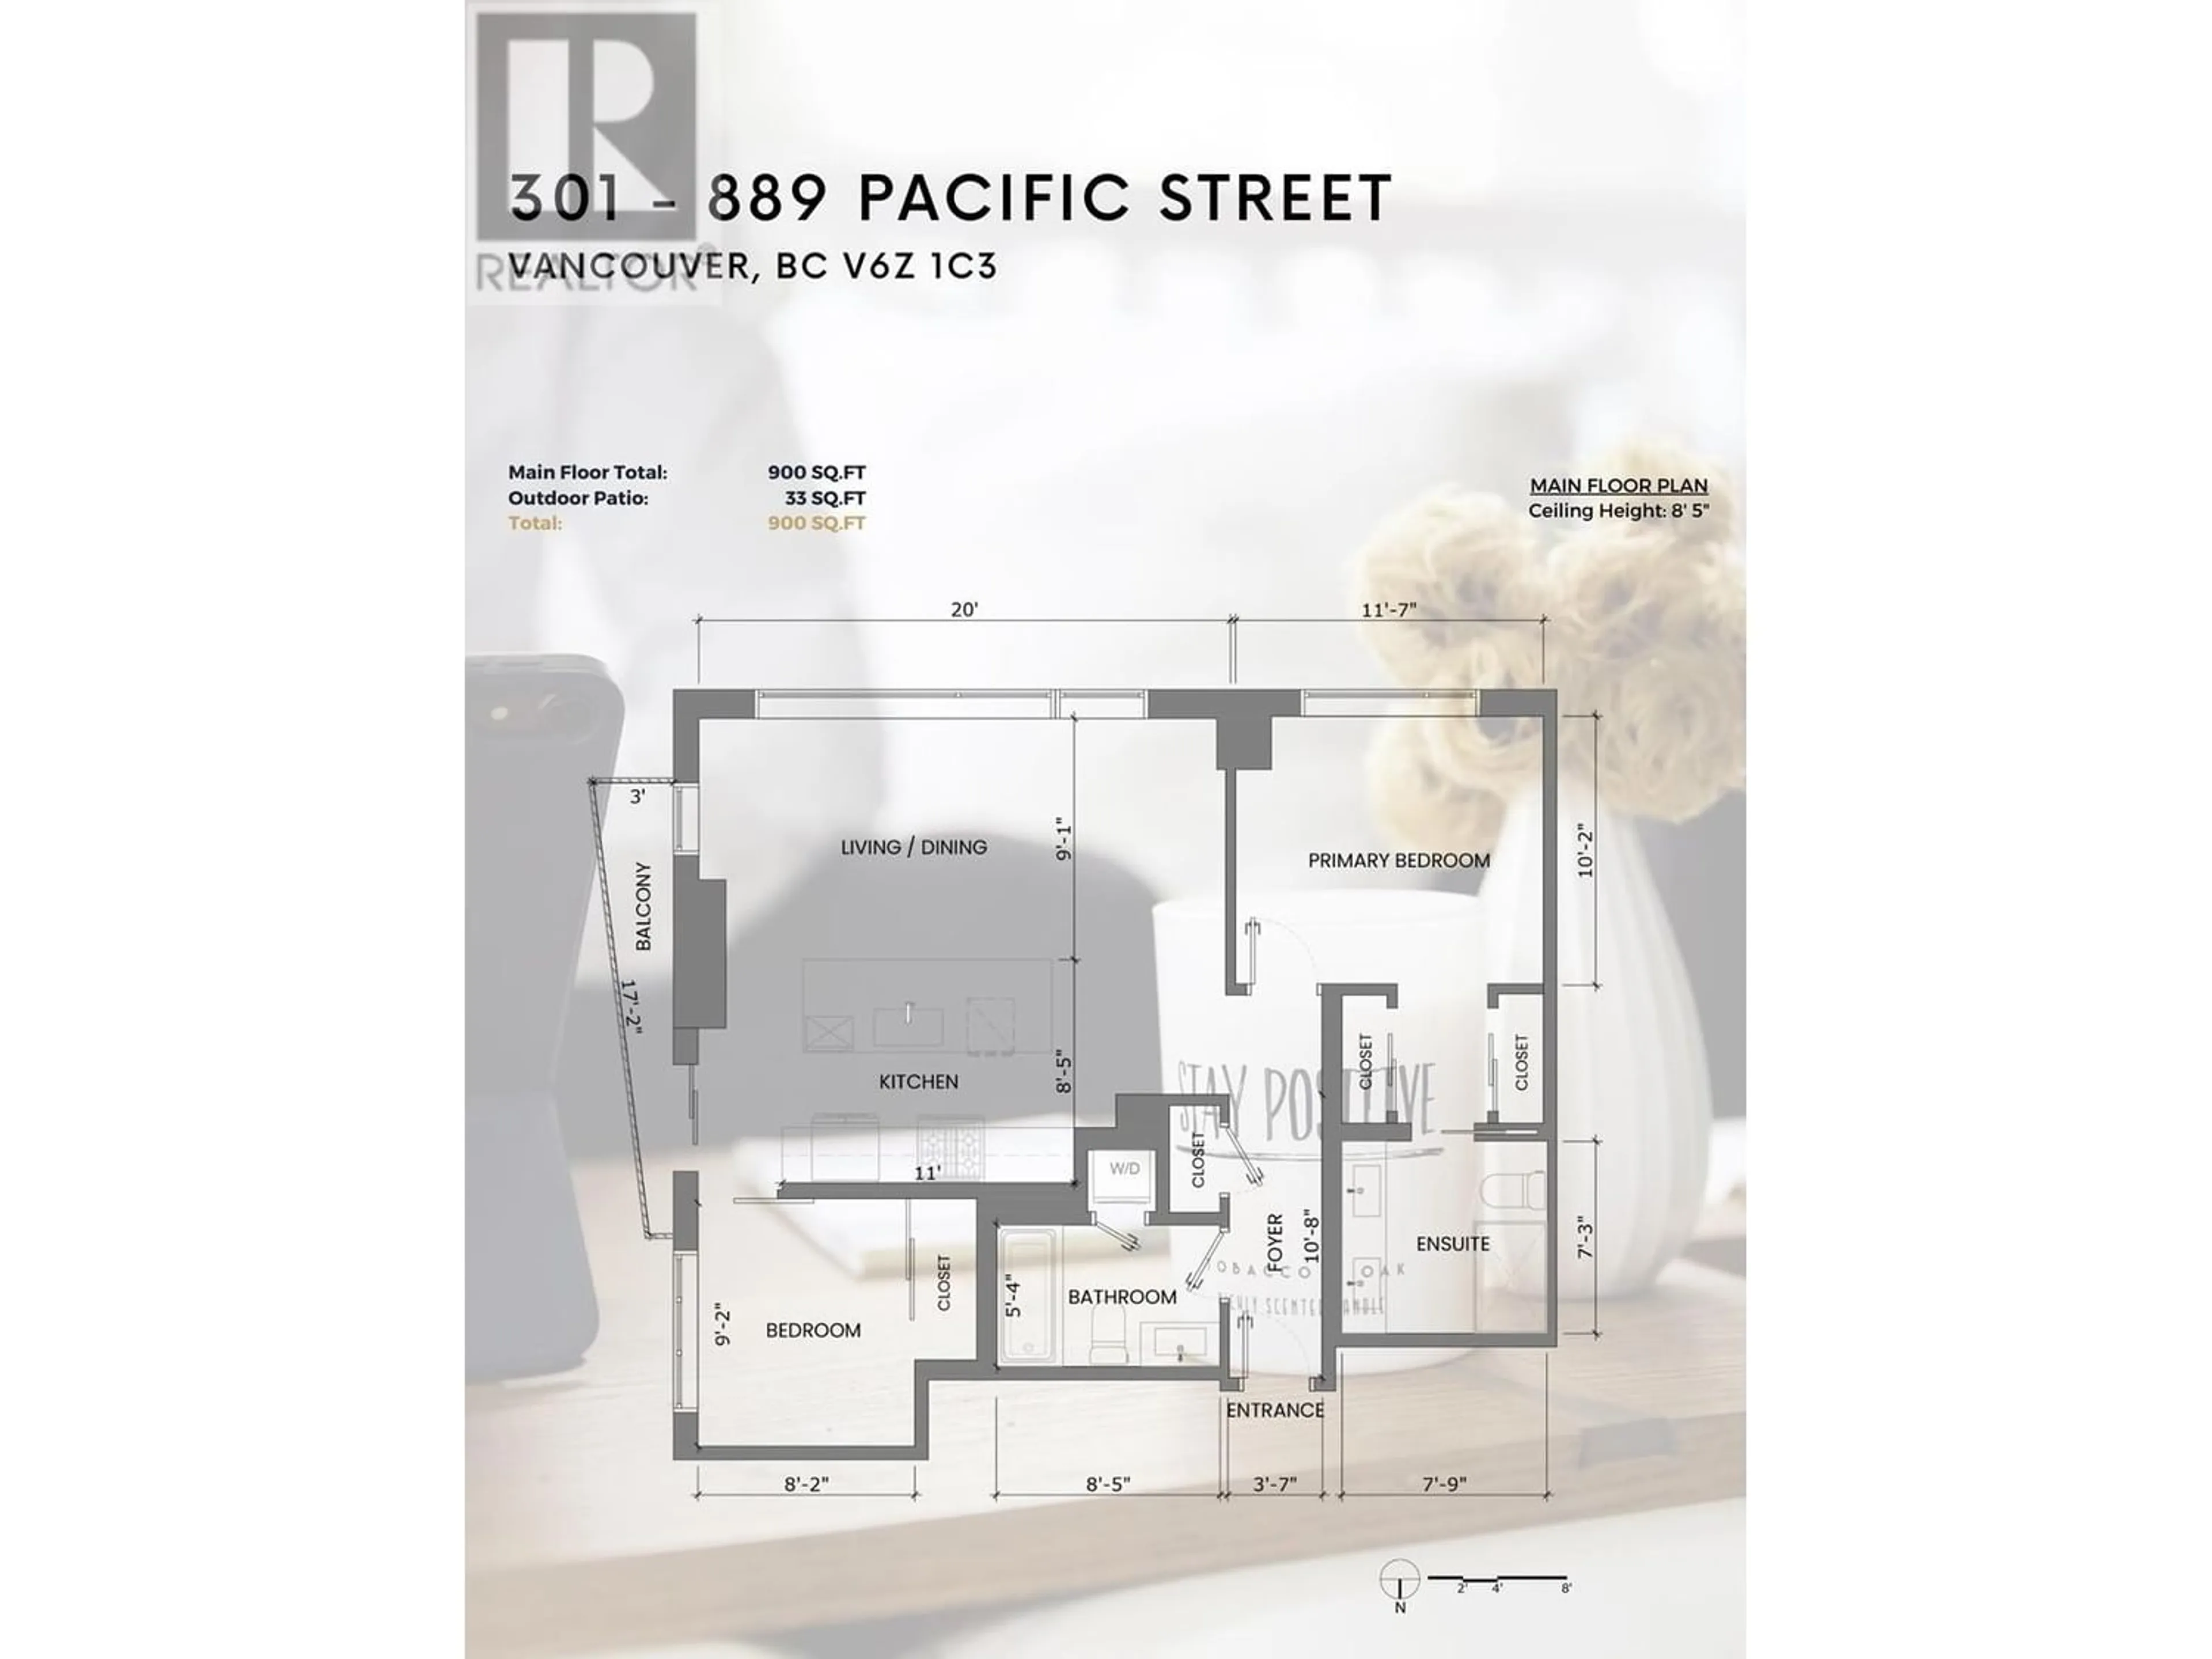 Floor plan for 301 889 PACIFIC STREET, Vancouver British Columbia V6Z1C3